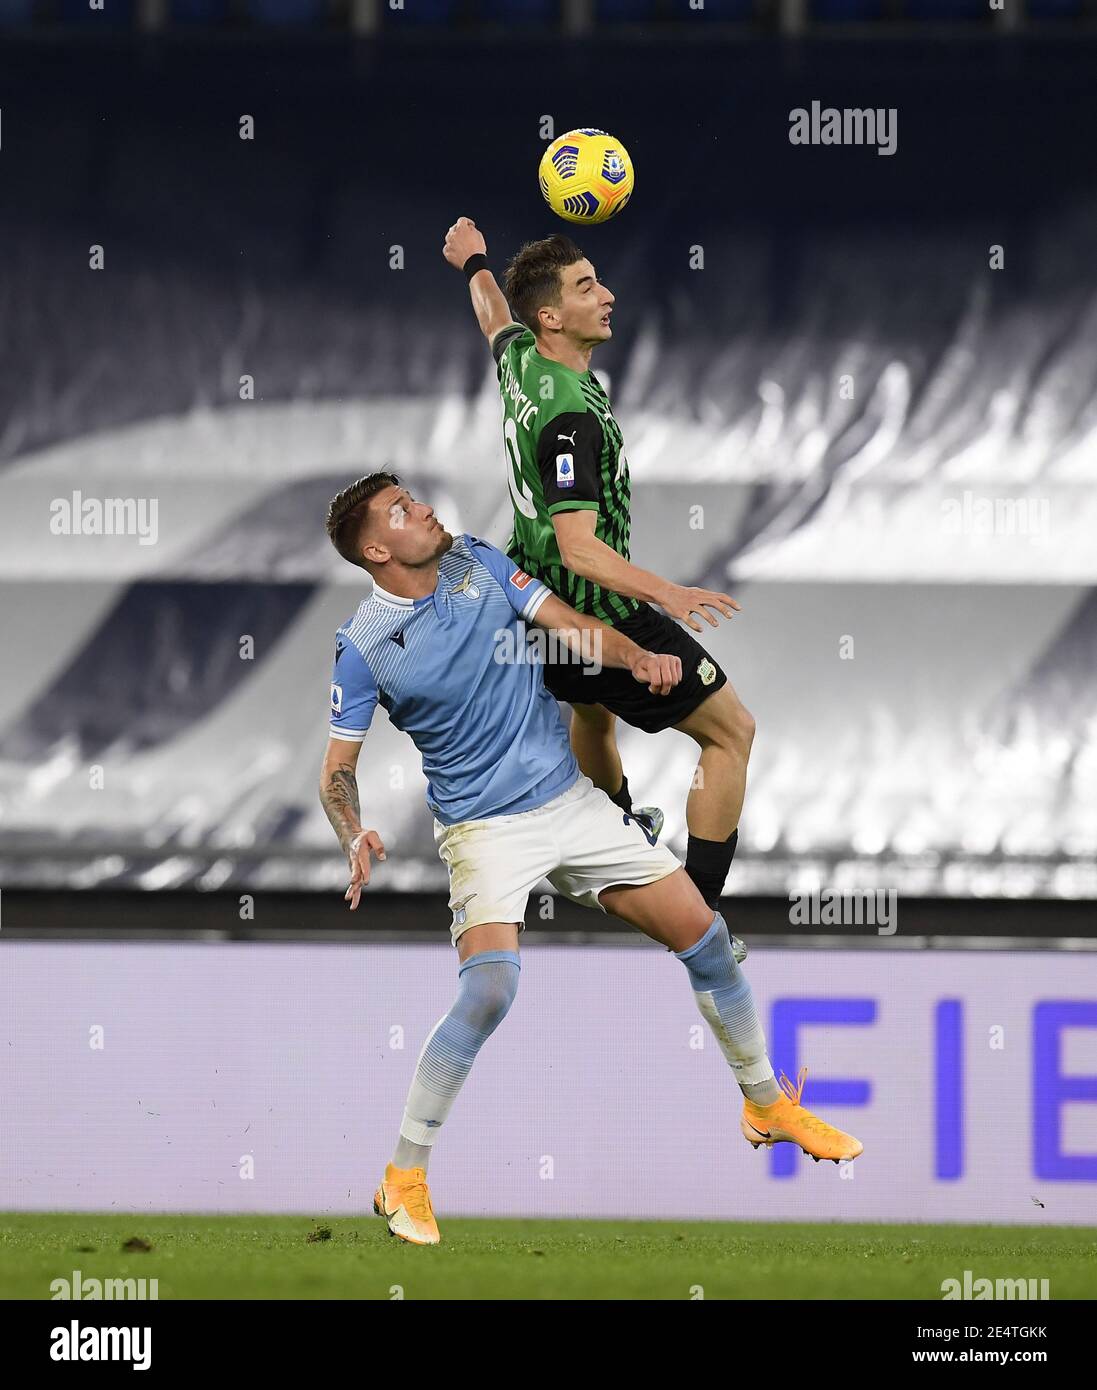 Rome, Italy. 24th Jan, 2021. Lazio's Sergej Milinkovic-Savic (L) vies with Sassuolo's Filip Djuricic during a Serie A soccer match between Lazio and Sassuolo in Rome, Italy, Jan. 24, 2021. Credit: Augusto Casasoli/Xinhua/Alamy Live News Stock Photo